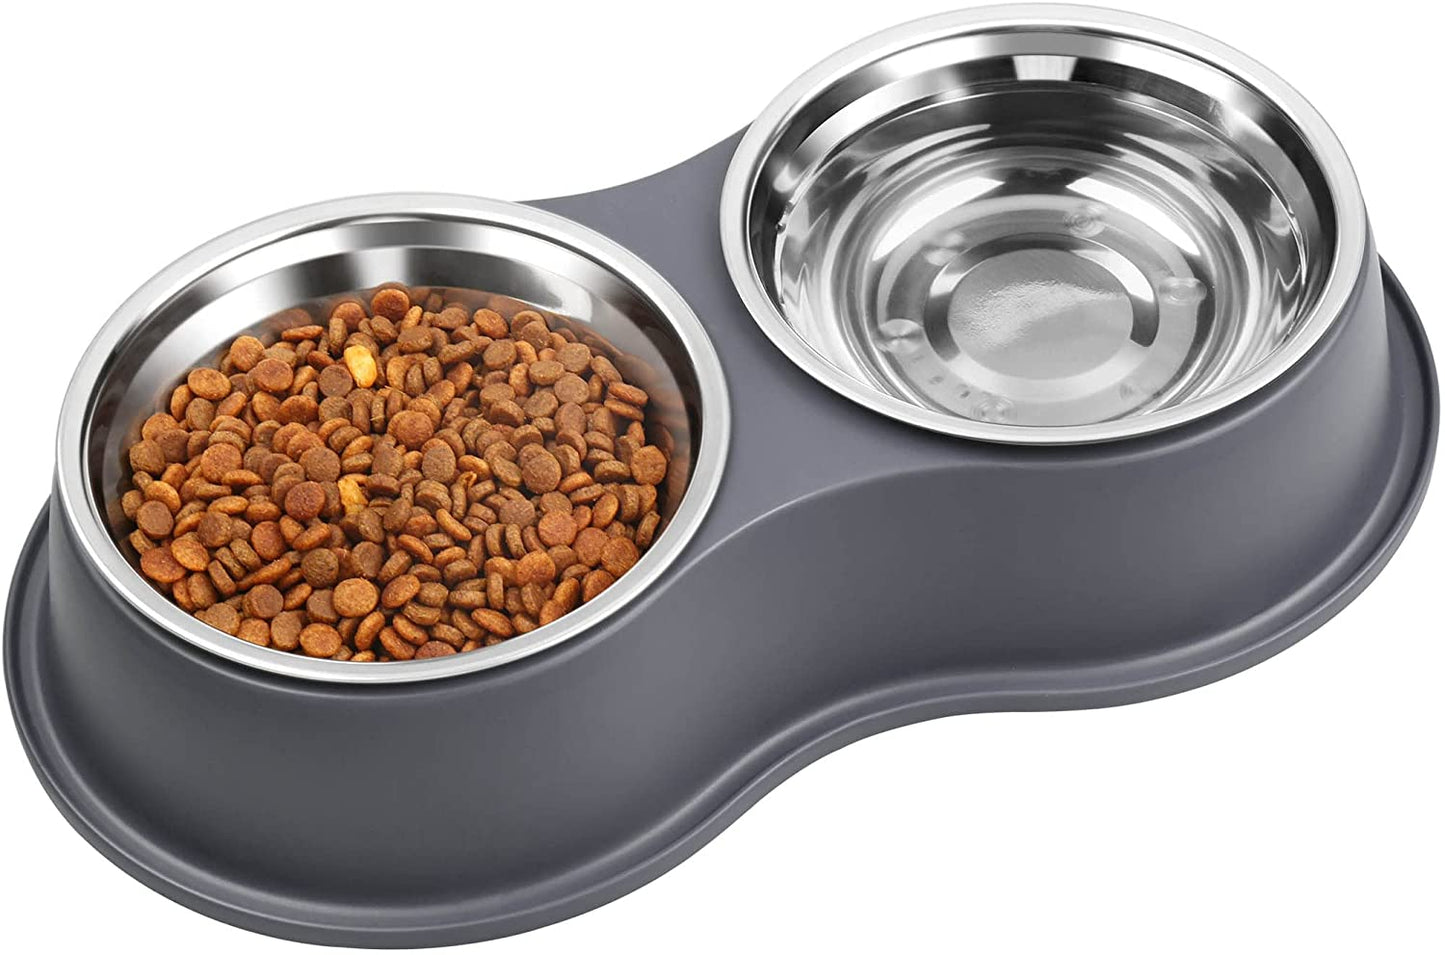 Pets Water and Food Bowl Set Cats Dogs Double Pet Bowls Design – leyomiao